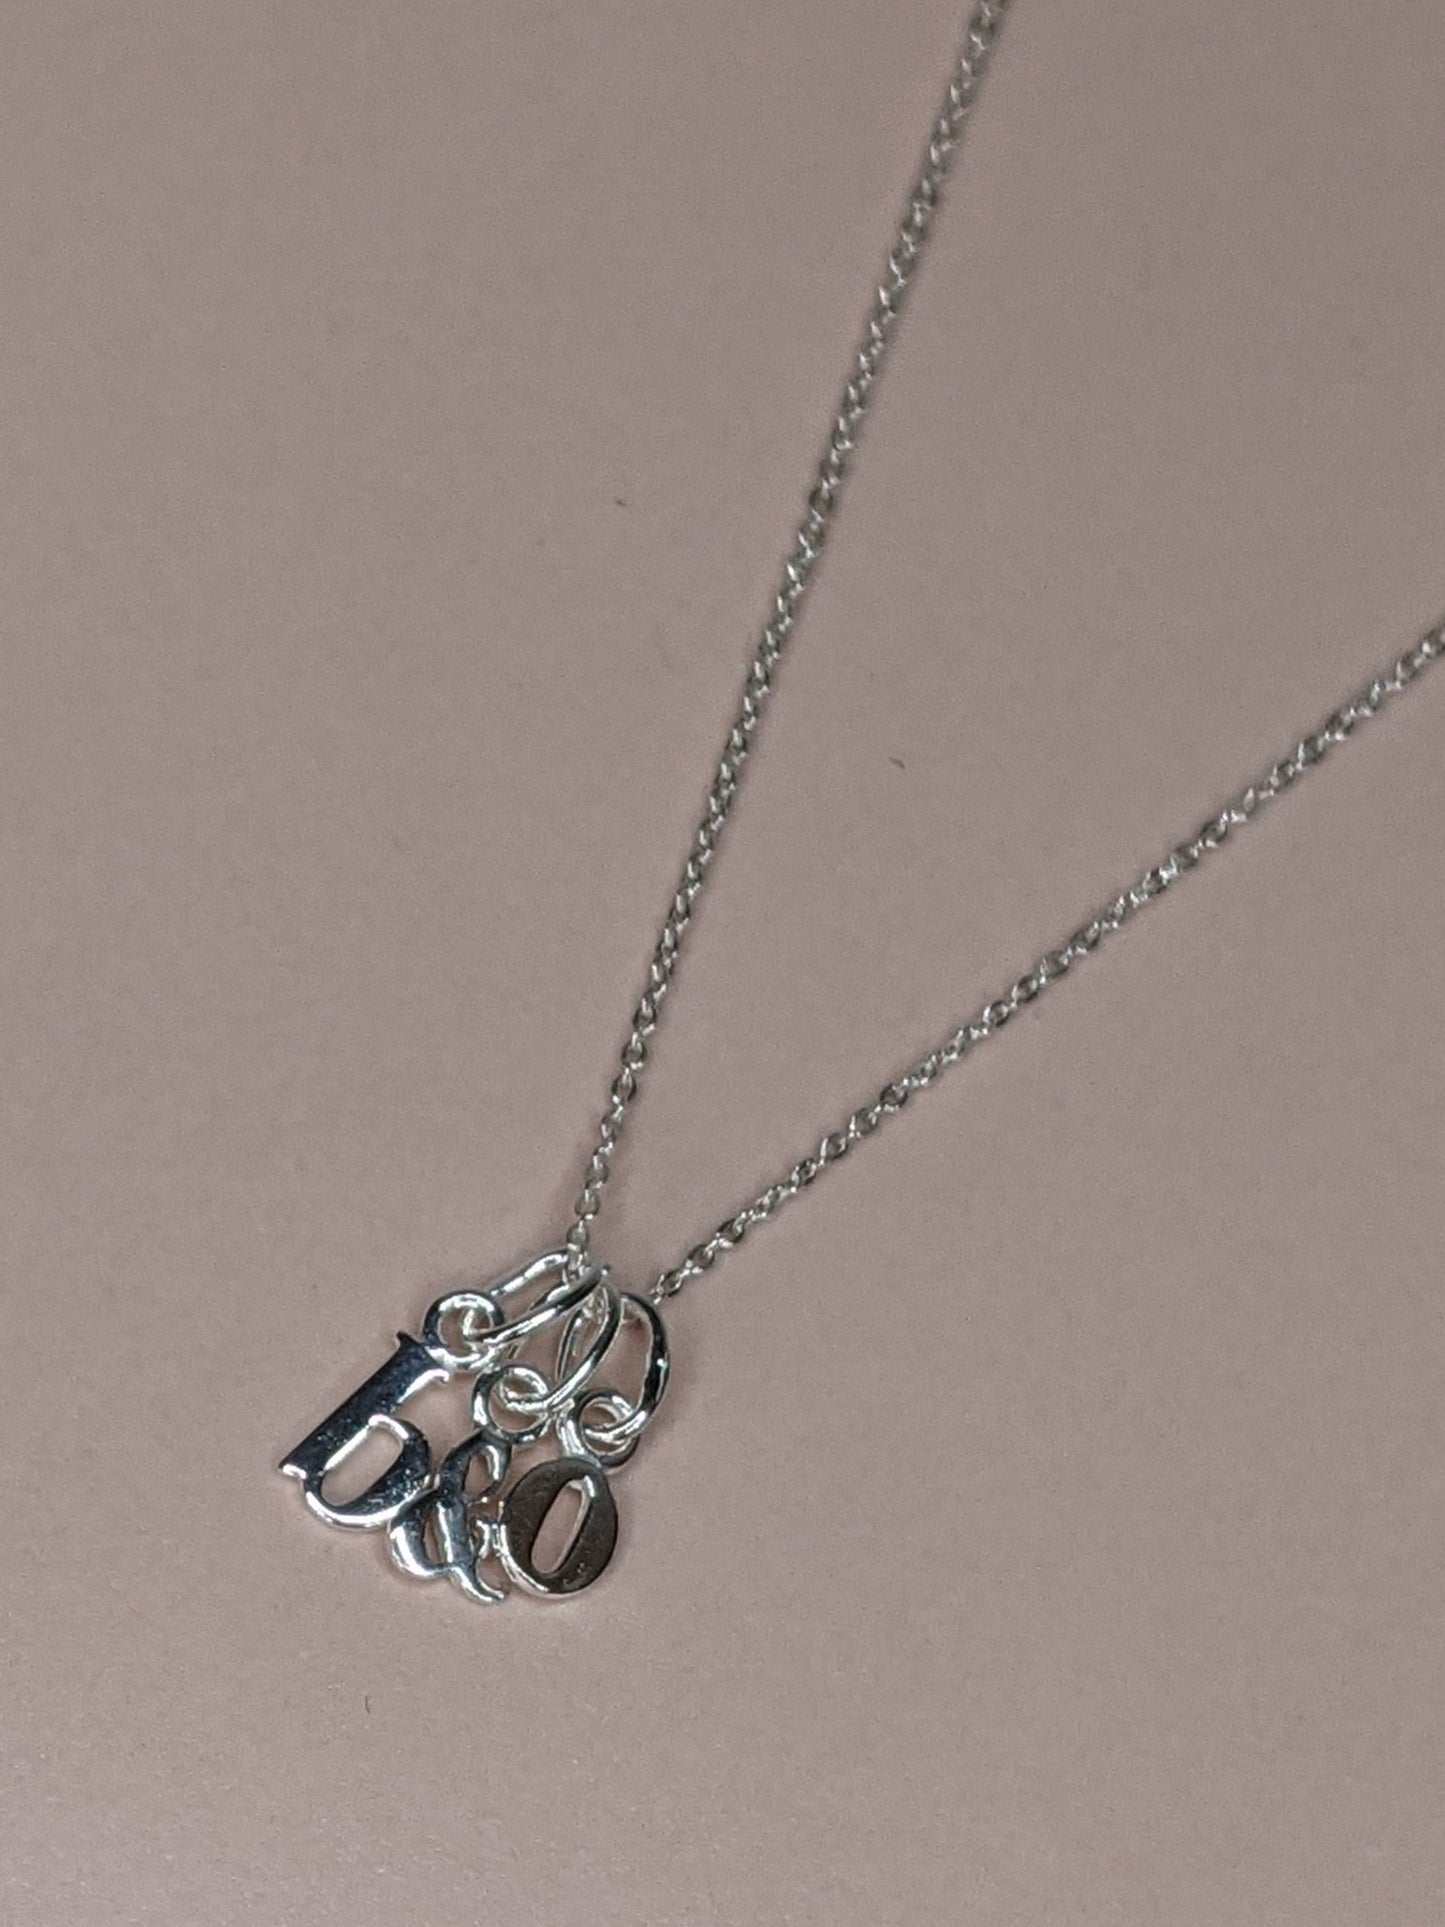 Tiny Lowercase Initial Necklace - Silver